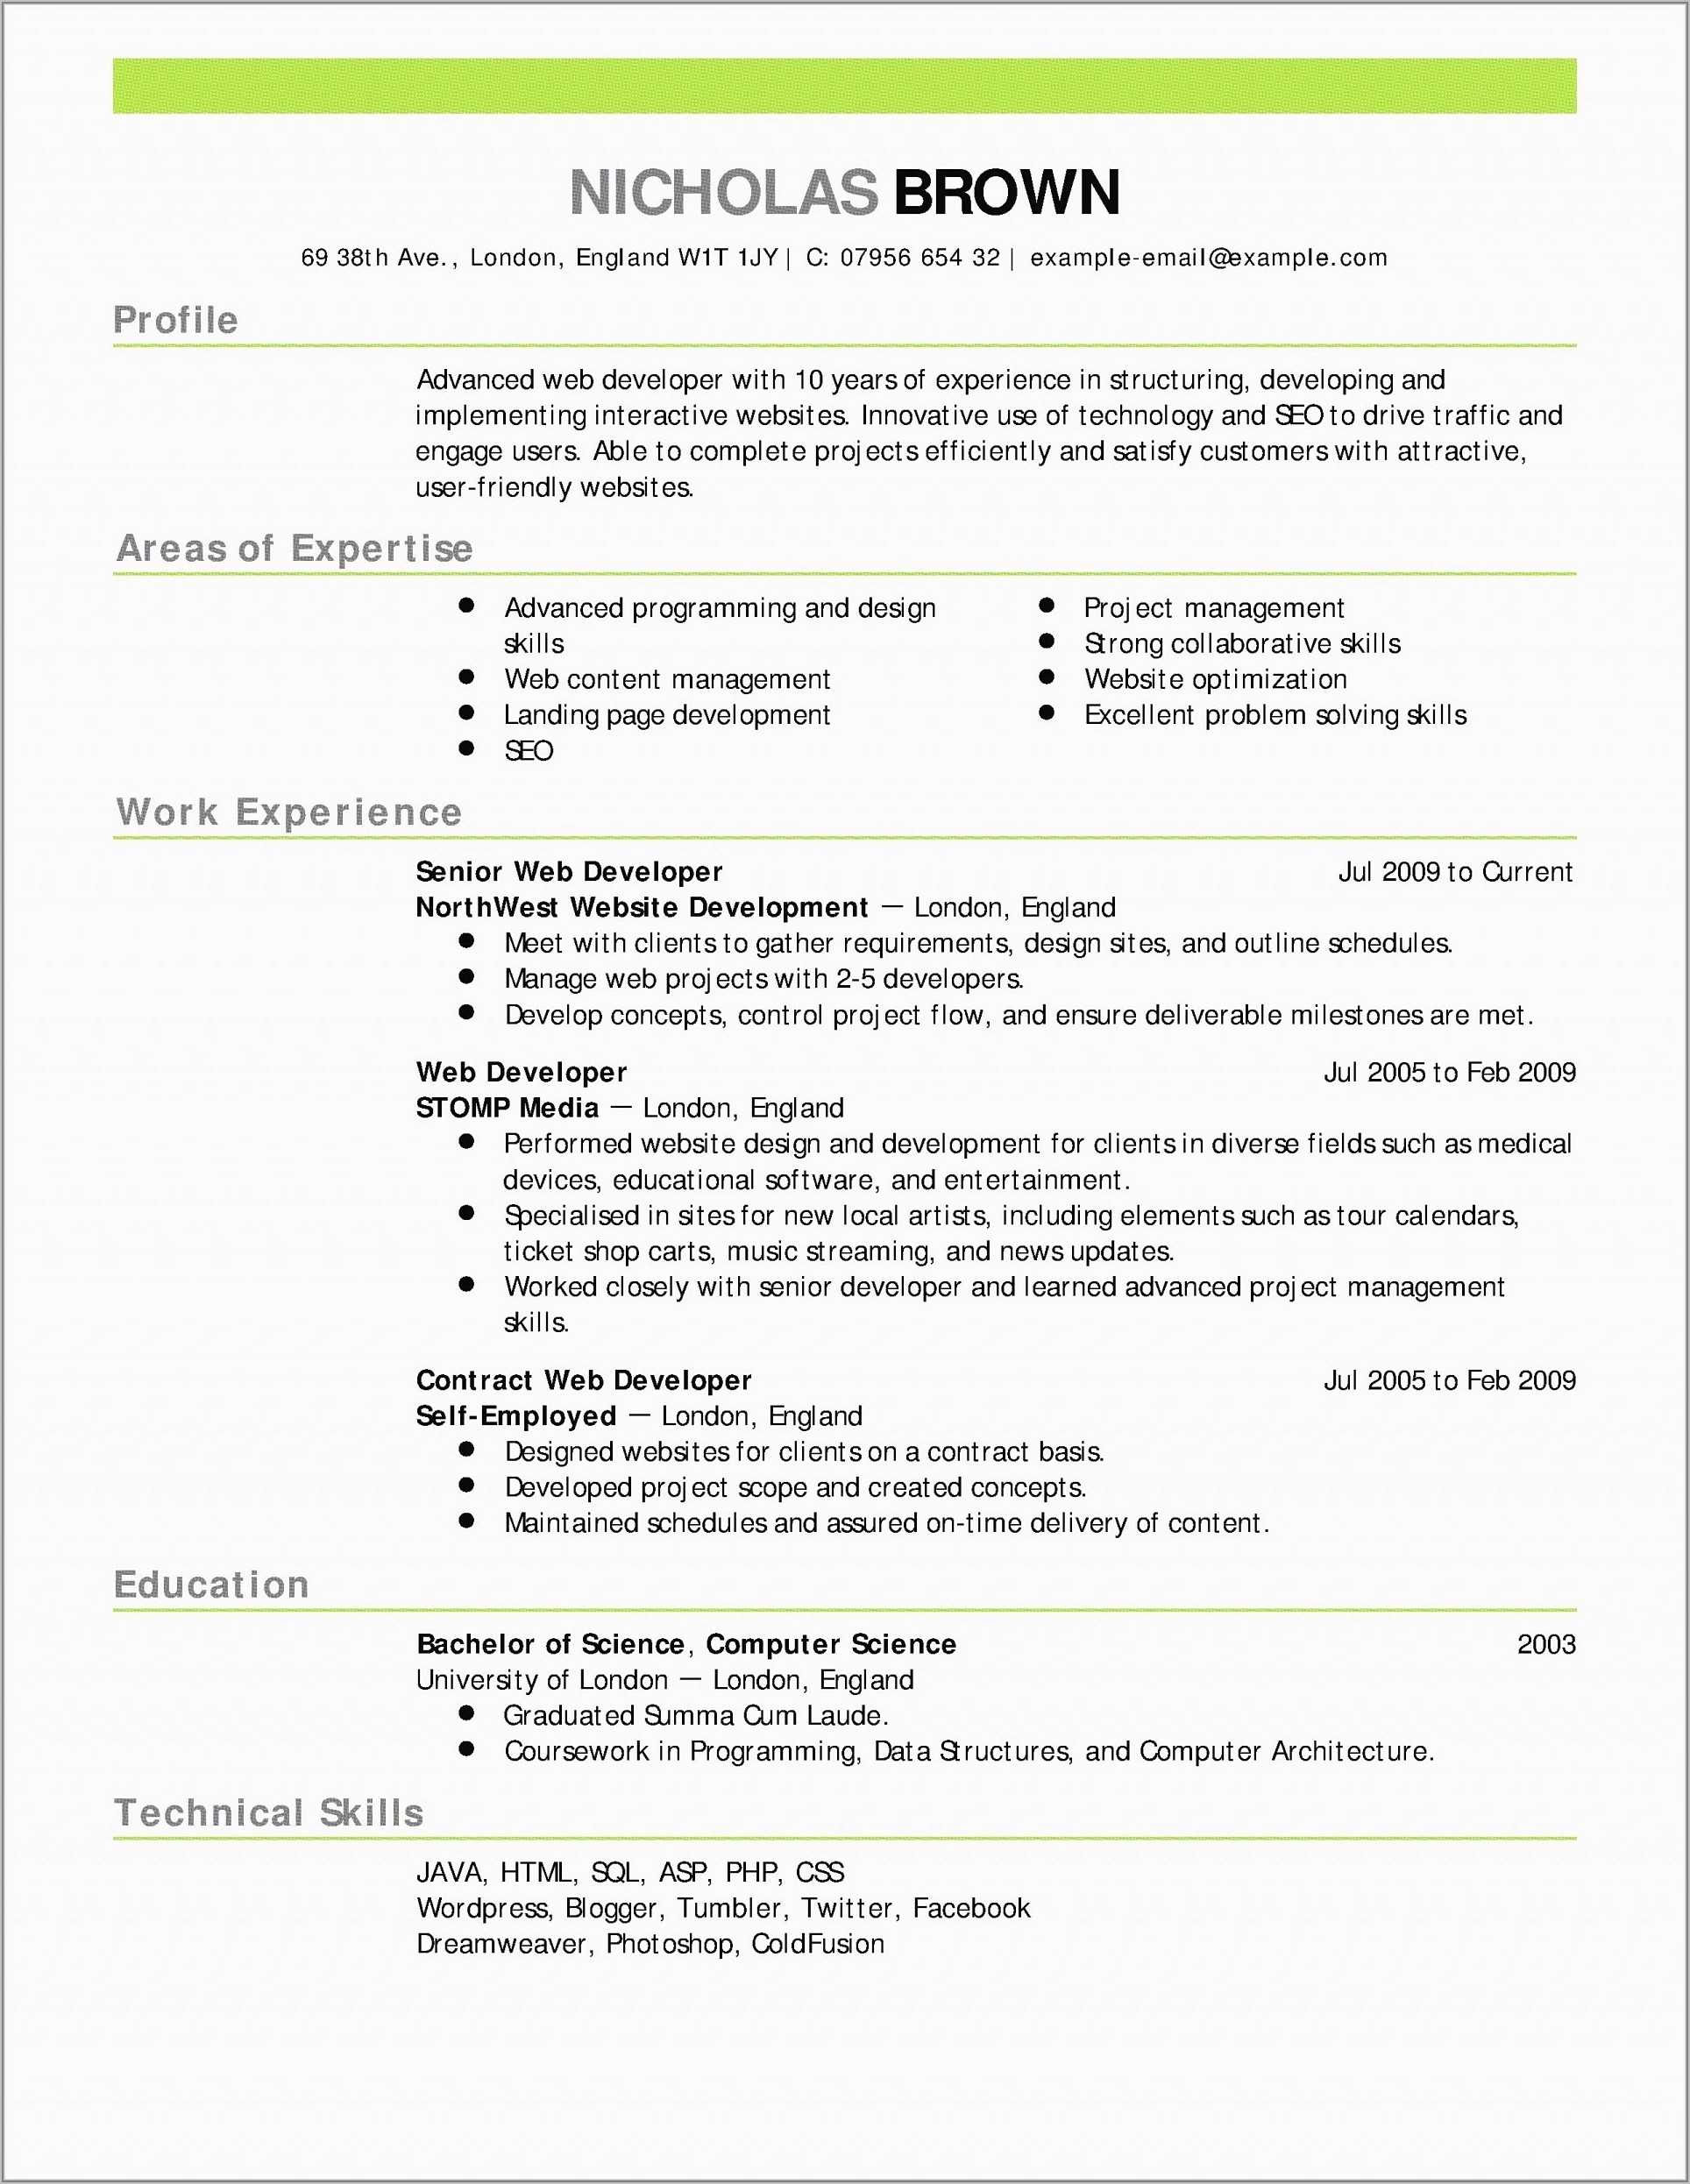 Free Cv Template Download Ms Word Resume : Restiumani Resume #a1YqEGPYPp